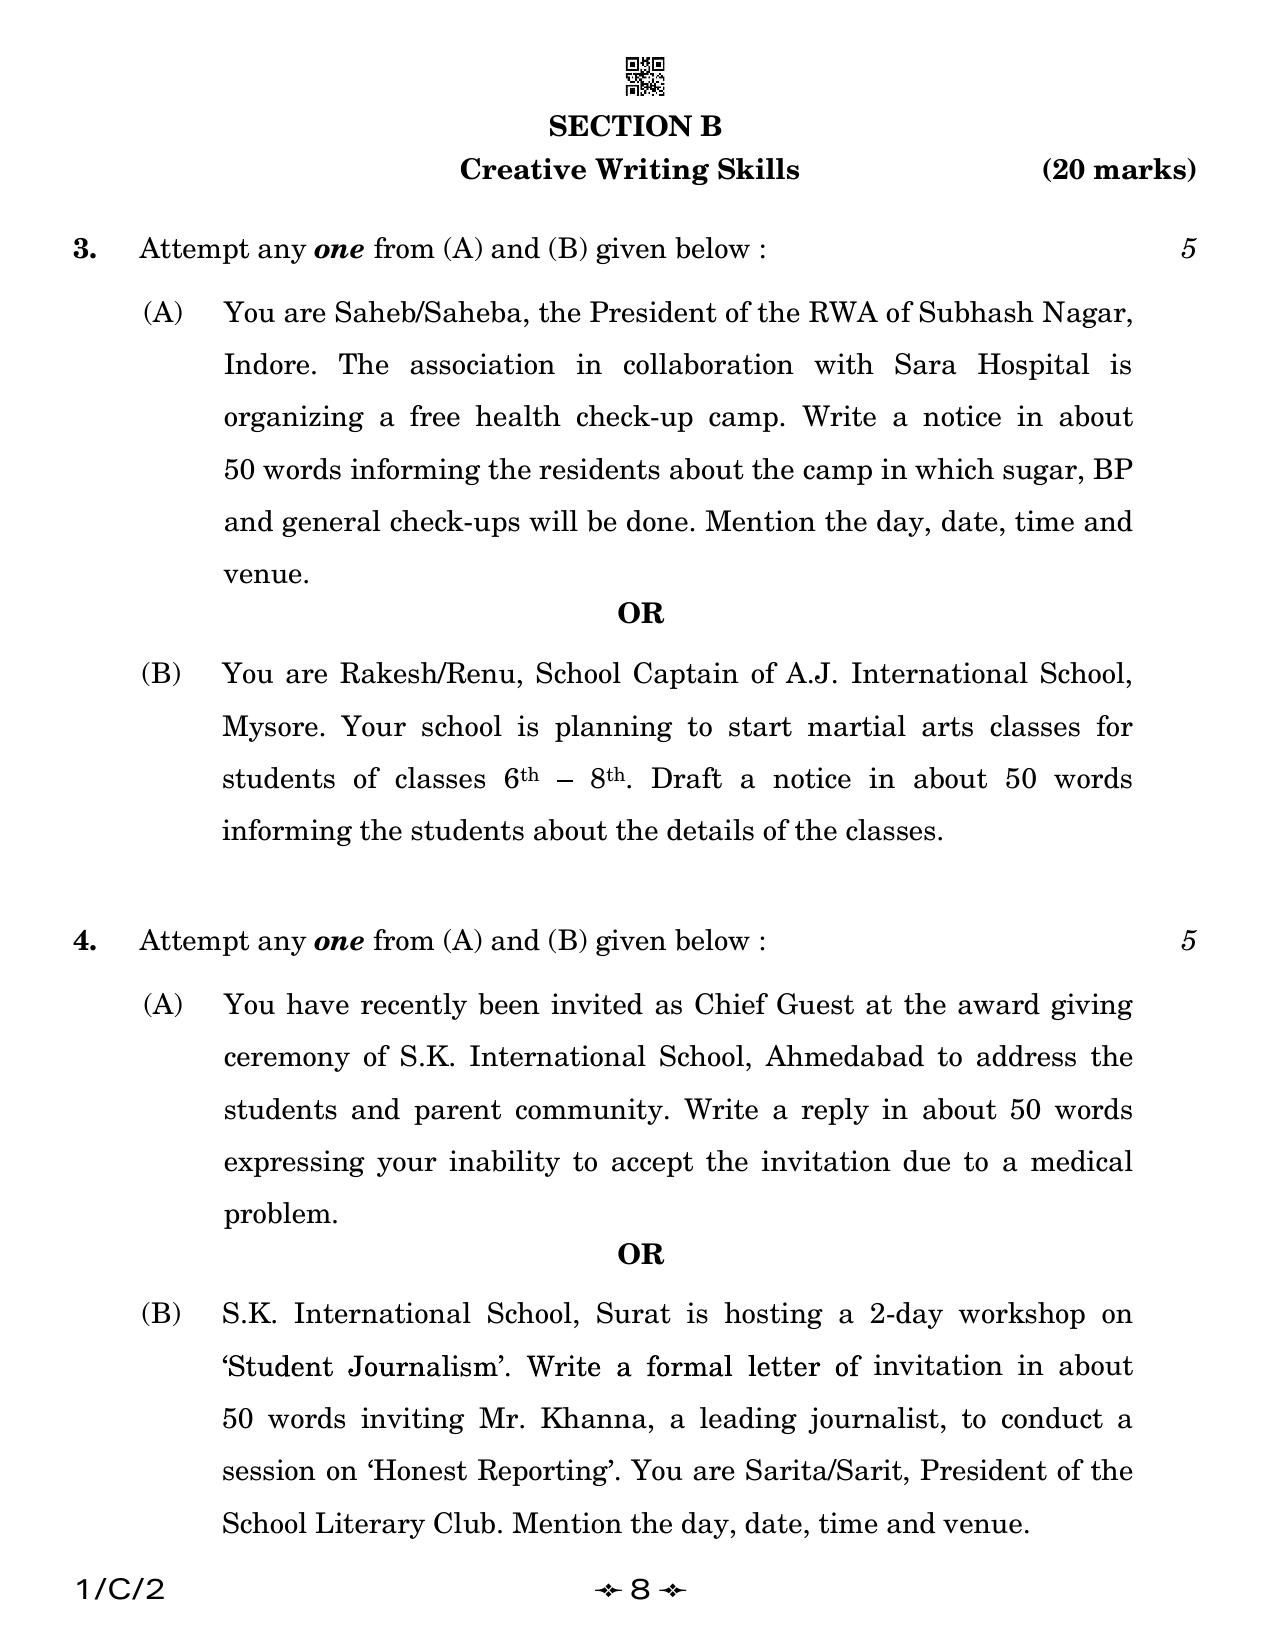 CBSE Class 12 1-2 English Core 2023 (Compartment) Question Paper - Page 8